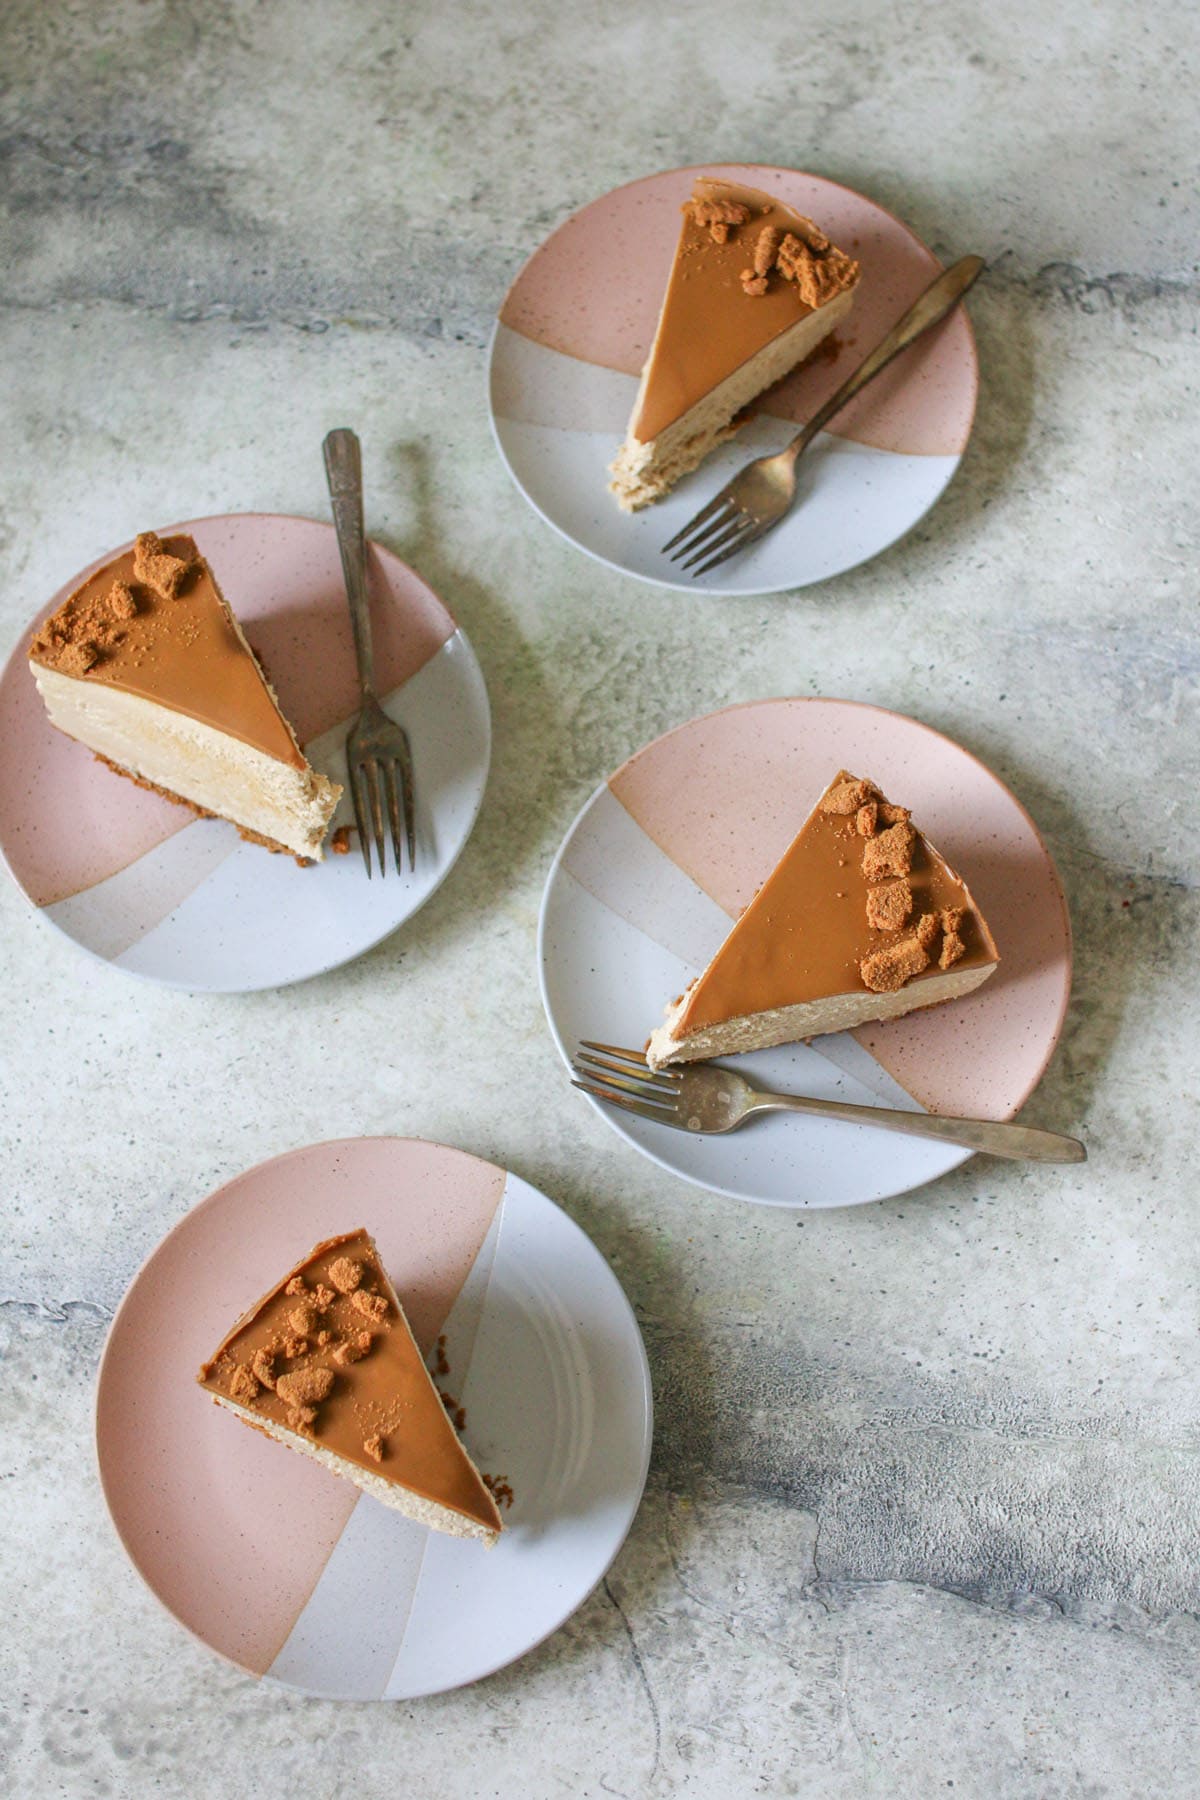 4 slices of No Bake Biscoff Cheesecake on pink and white plates on a cement background. 3 plates had an antique fork.